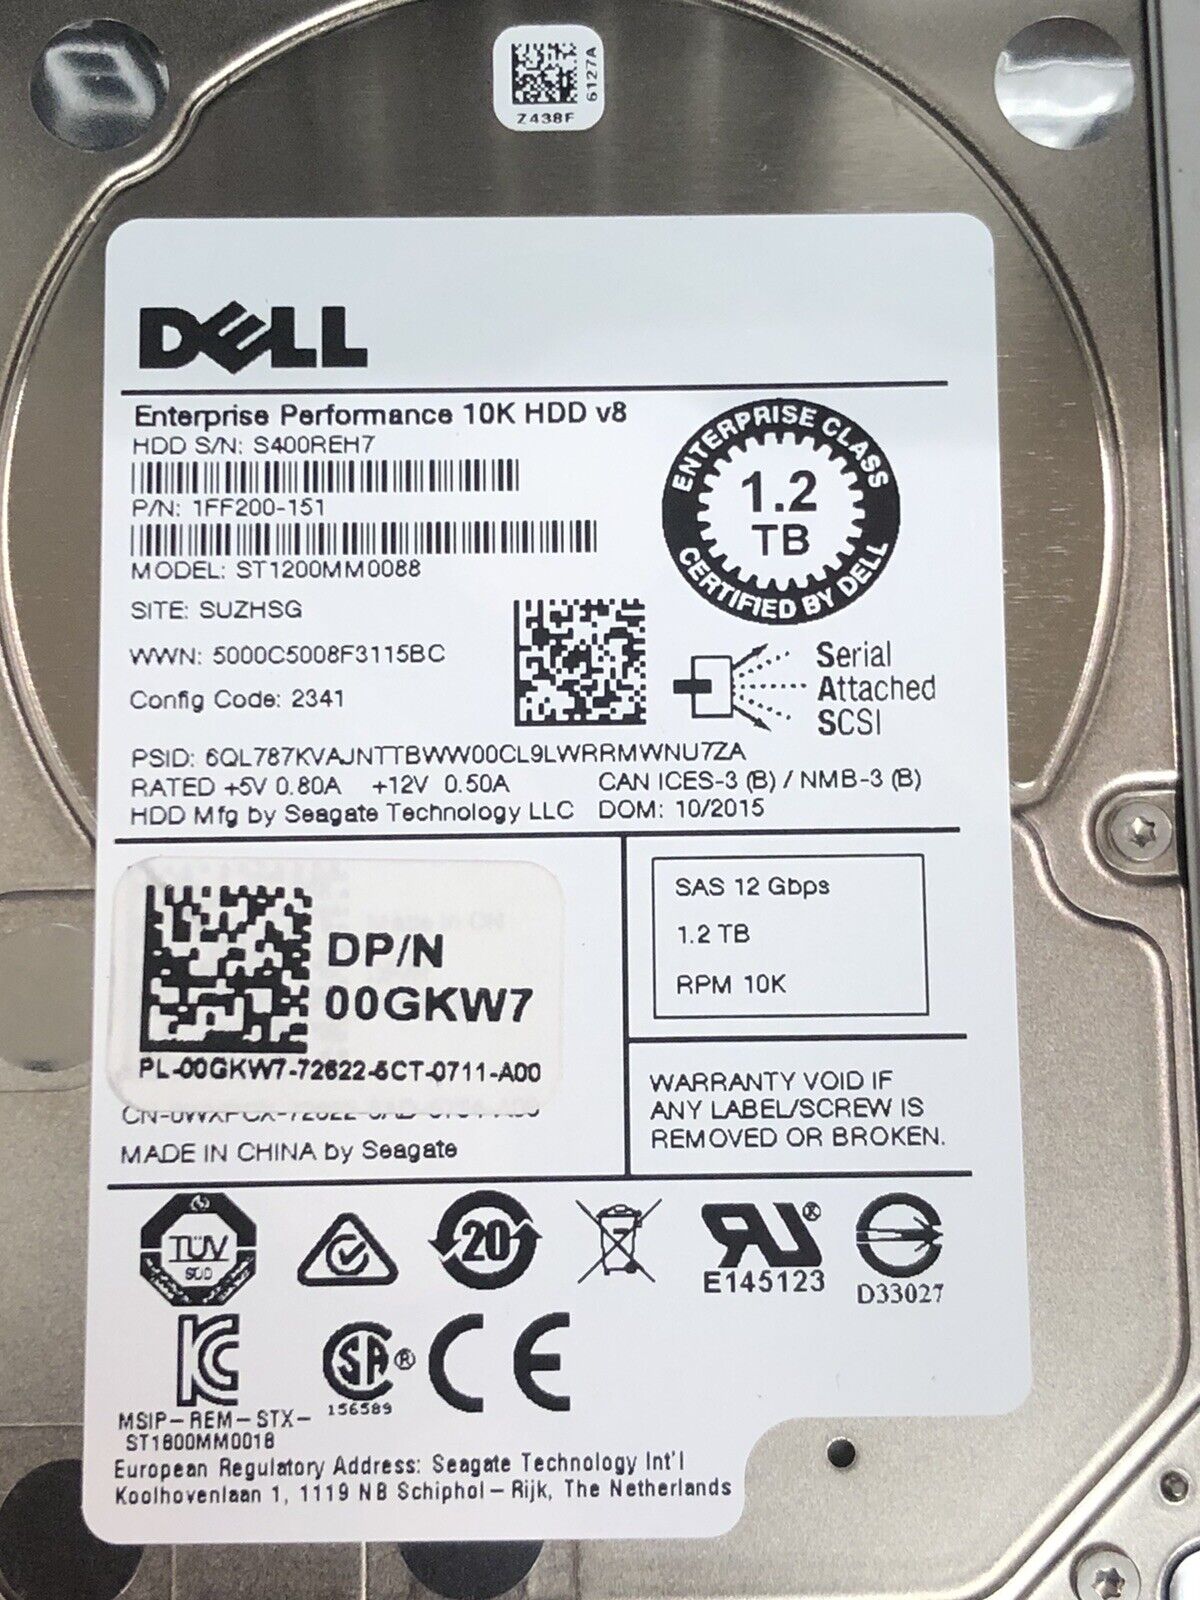 Dell 00GKW7 1.2TB 10K SAS III 12Gb/s HDD ST1200MM0088 2.5 SFF Hard Drive with R-series tray